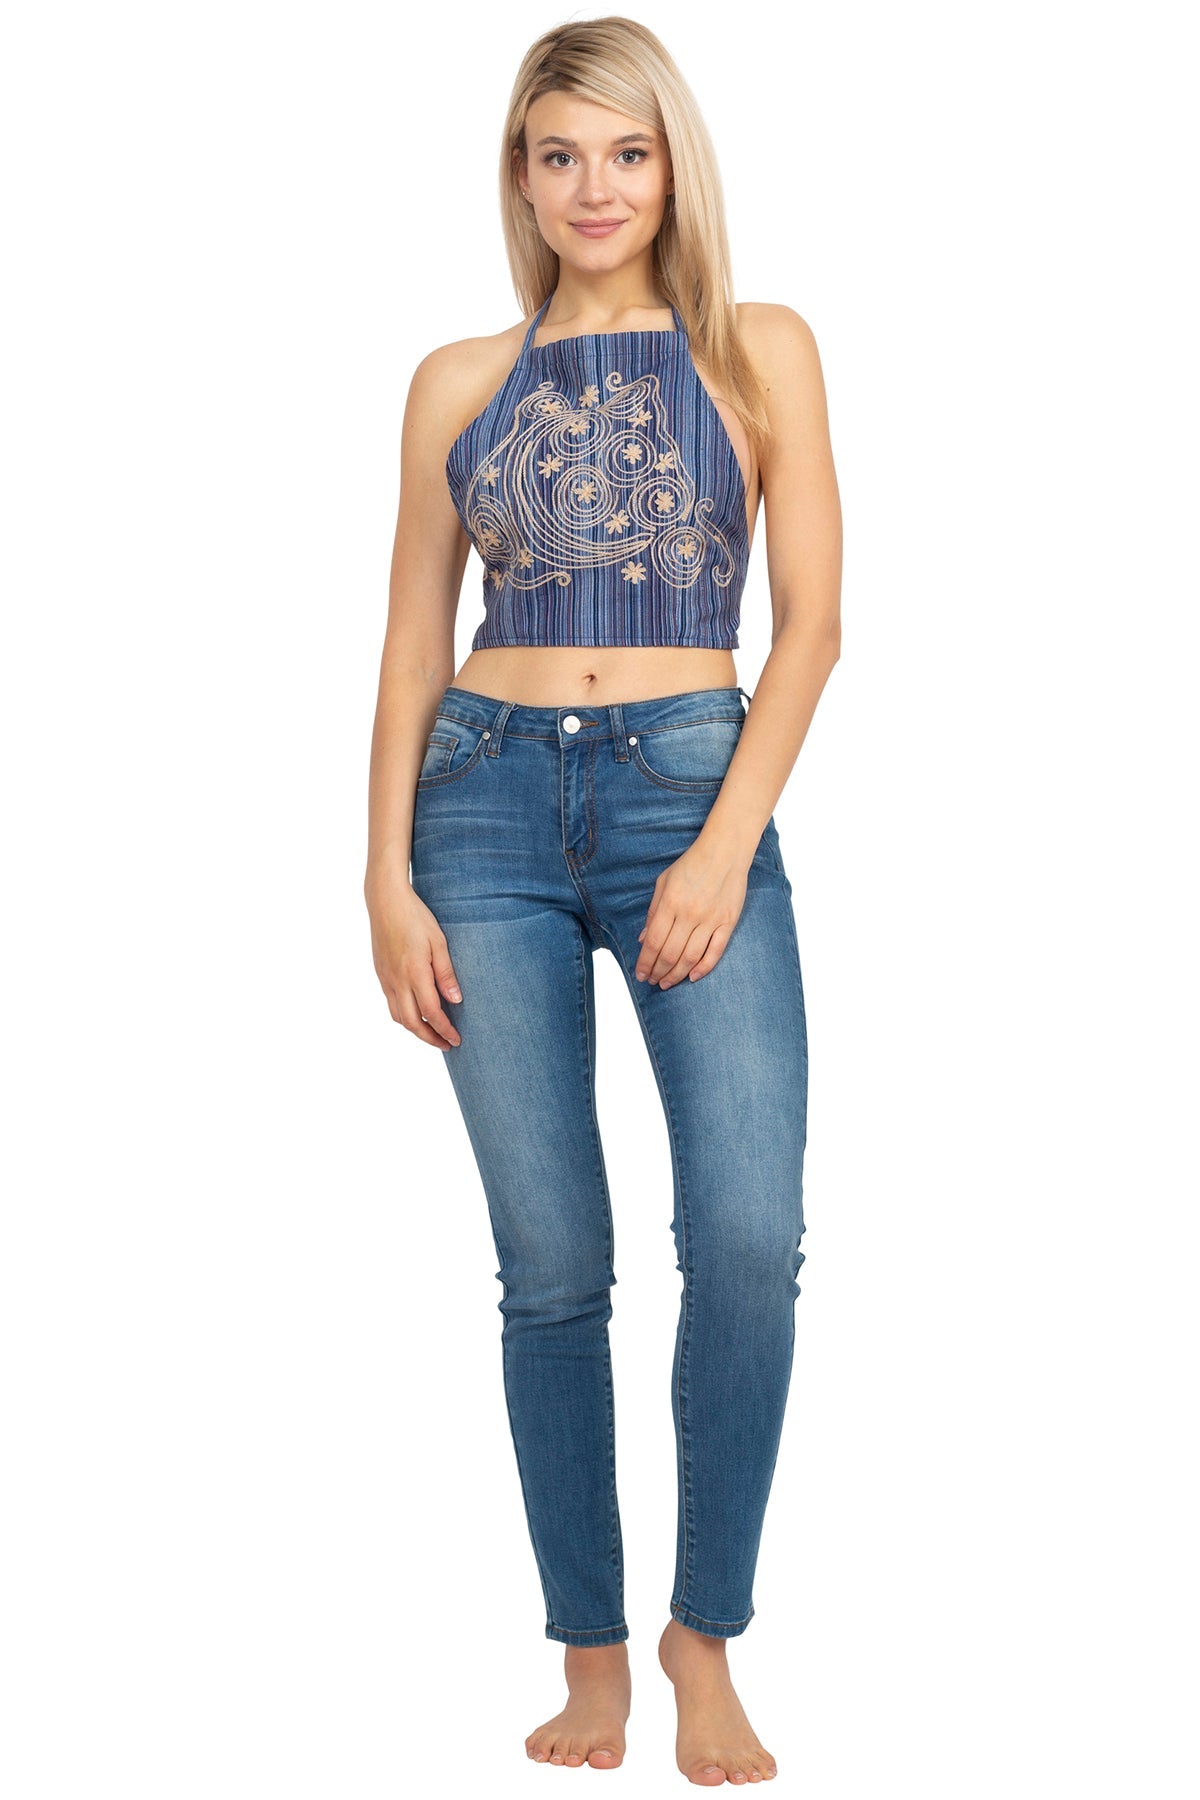 Celestial Embroidery Halter Top